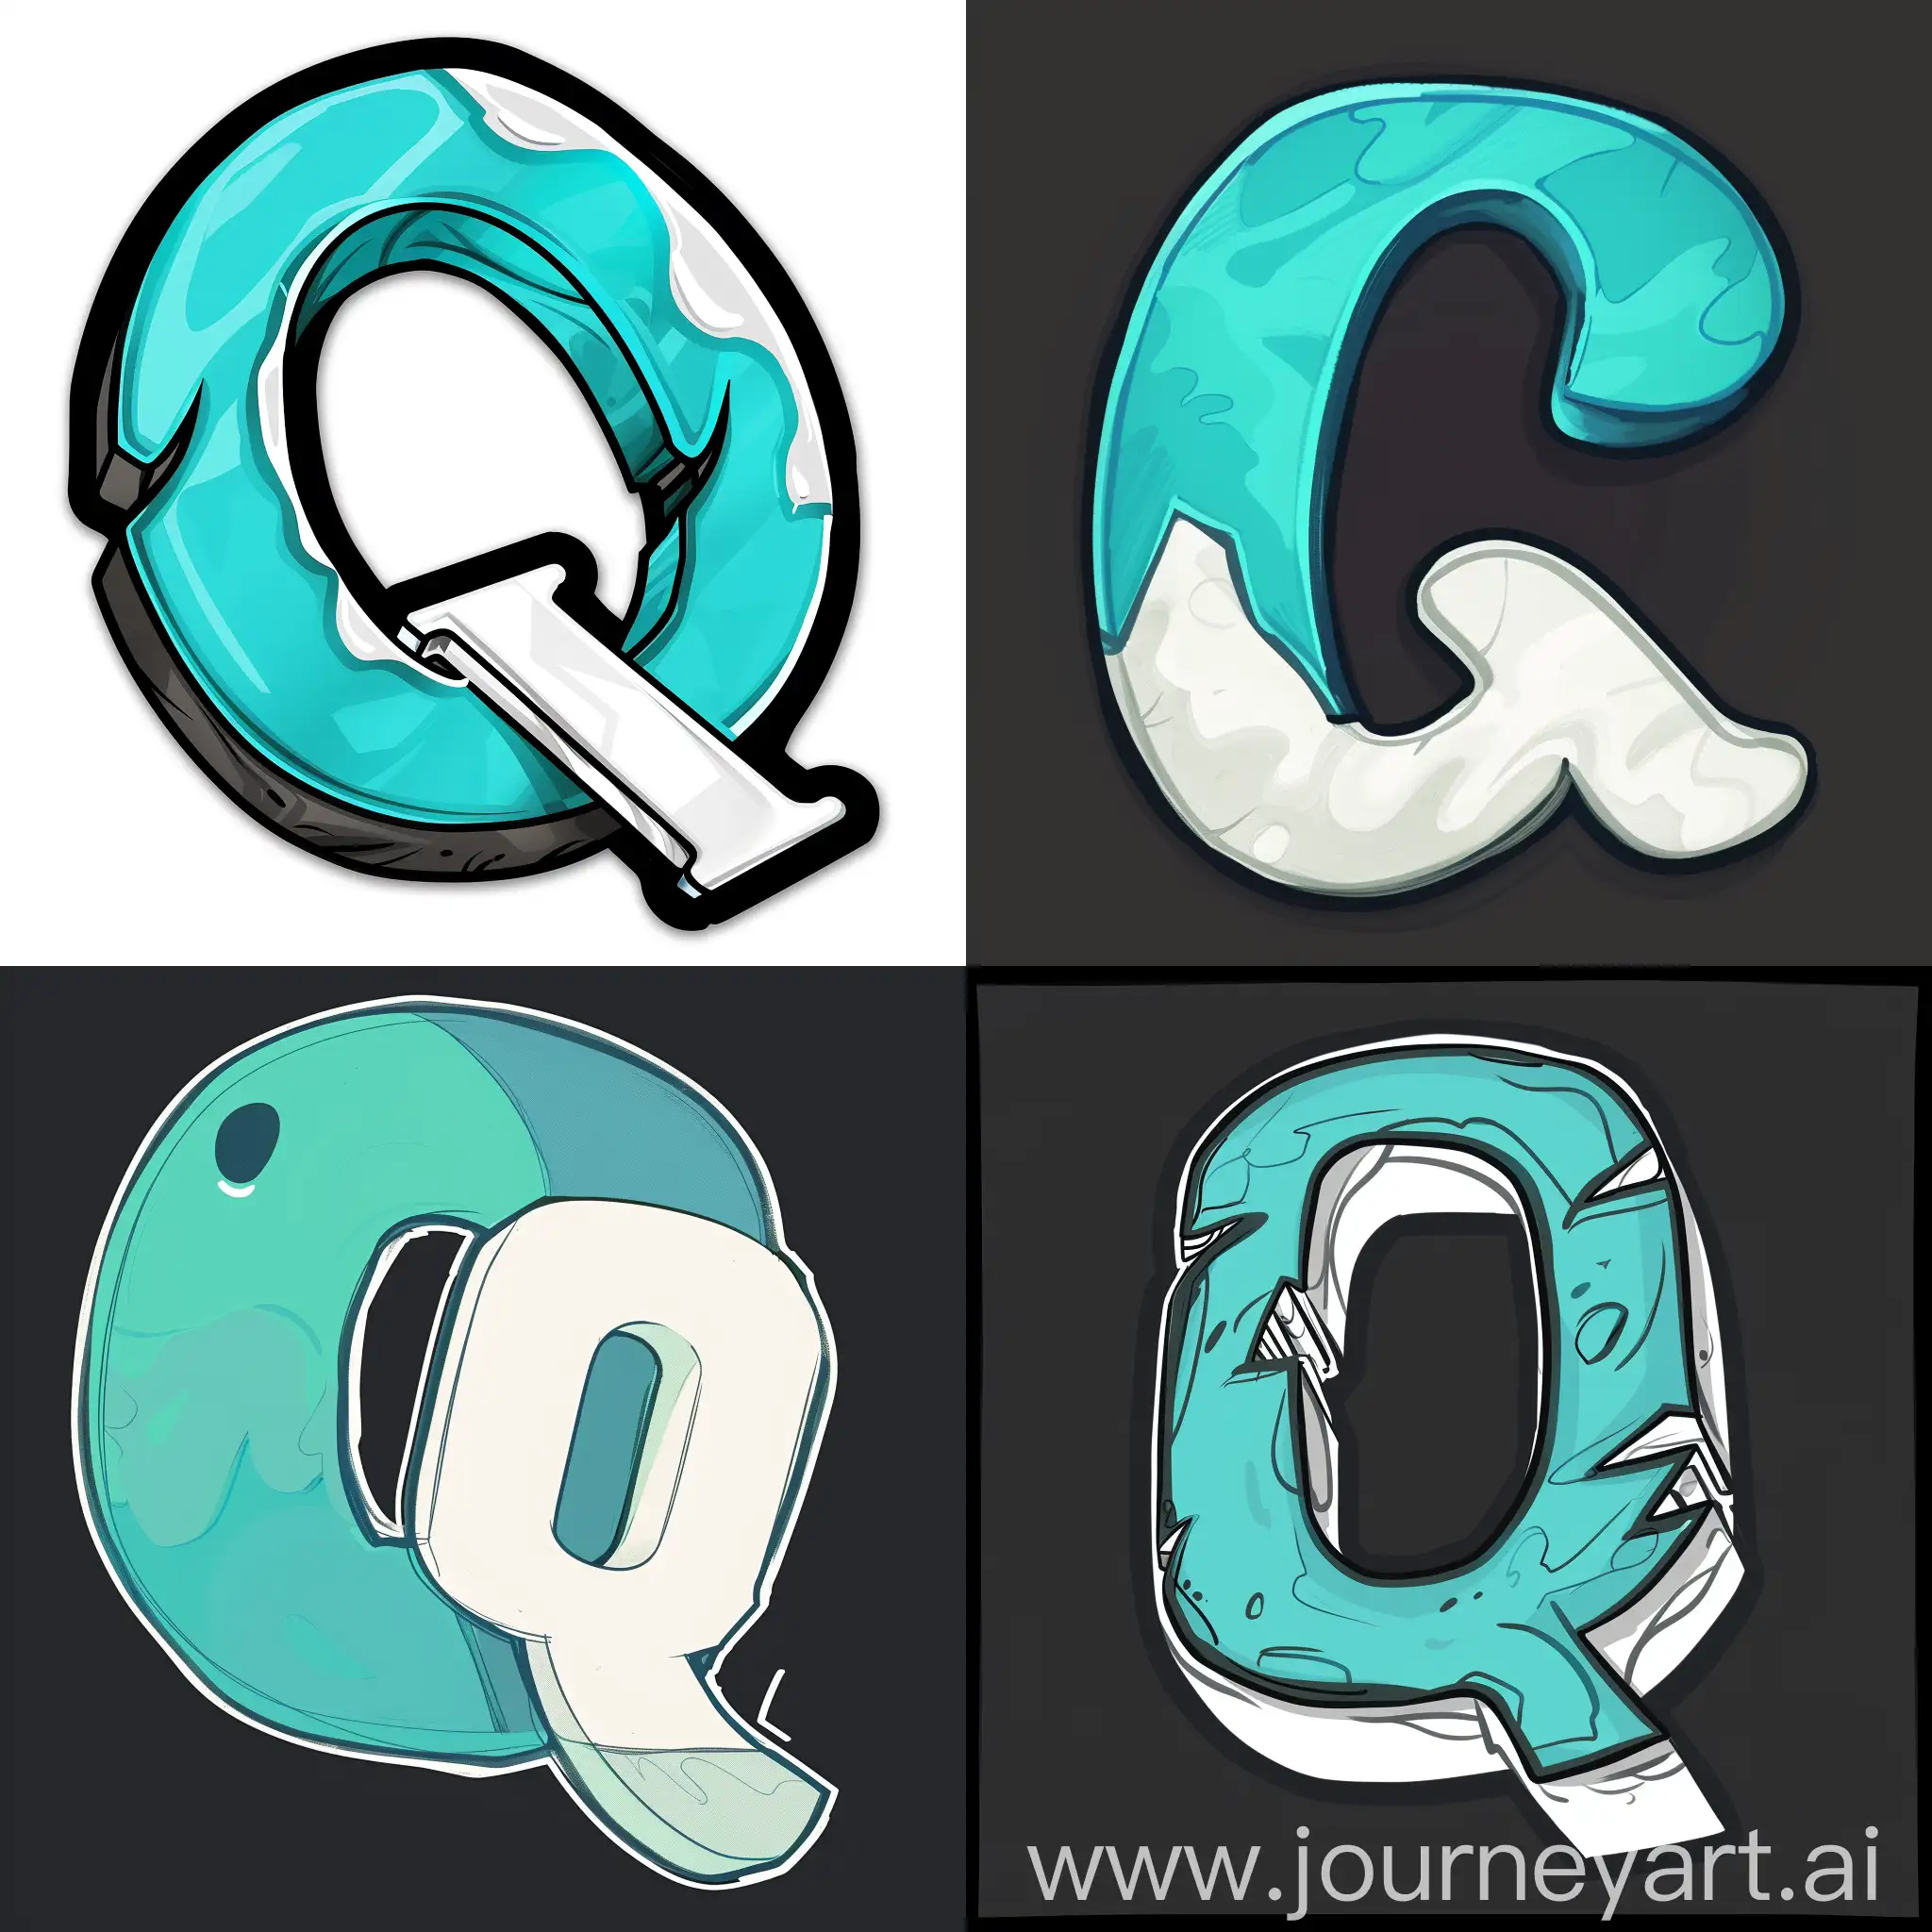 Discord-Avatar-Turquoise-Q-with-White-L